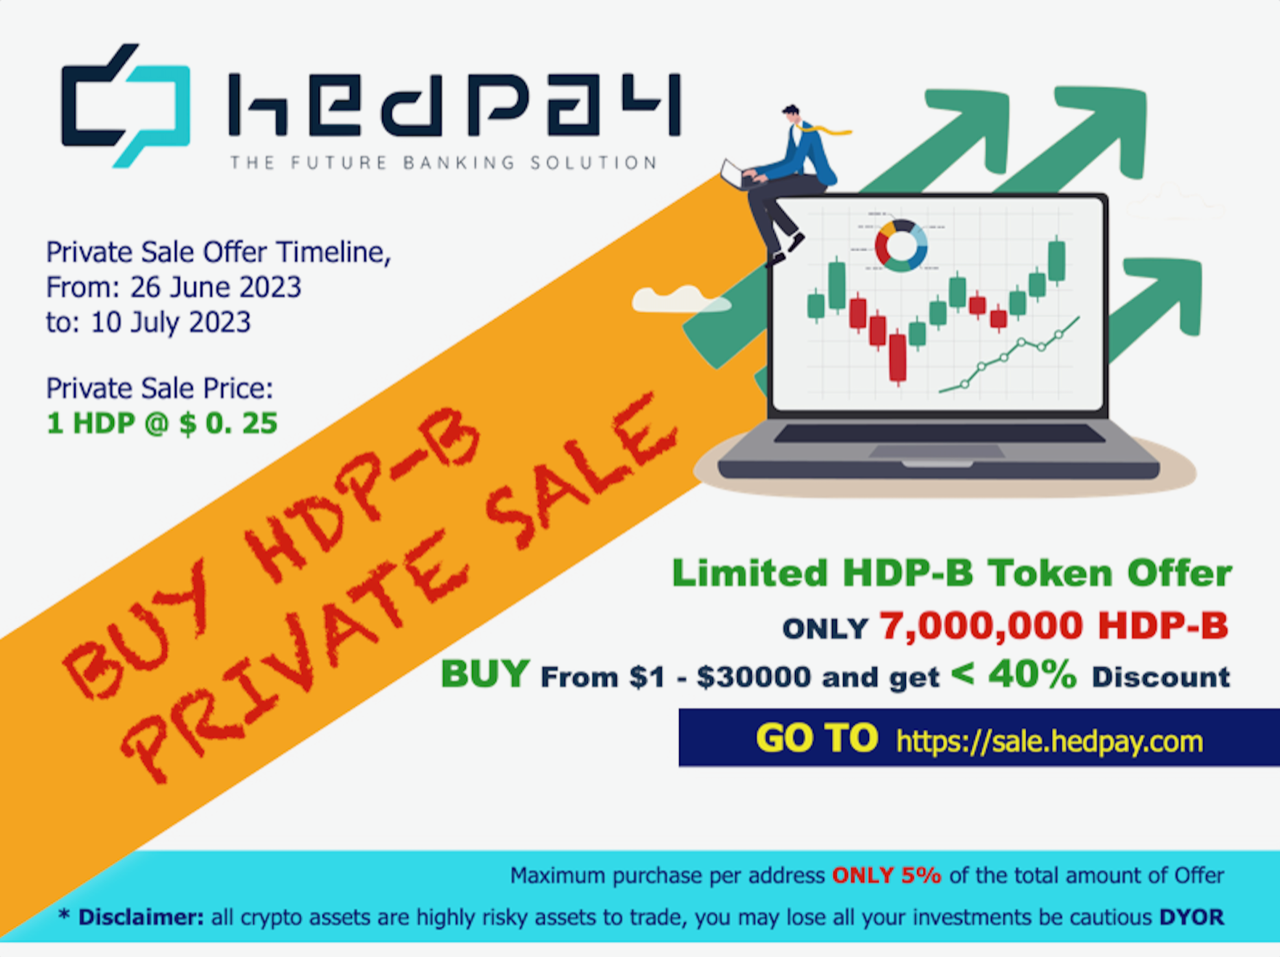 HBP-B Seed Offer! Limited HDP-B token offer, buy from $1 - $30000 and get up to 40% discount. Go to https://sale.hedpay.com